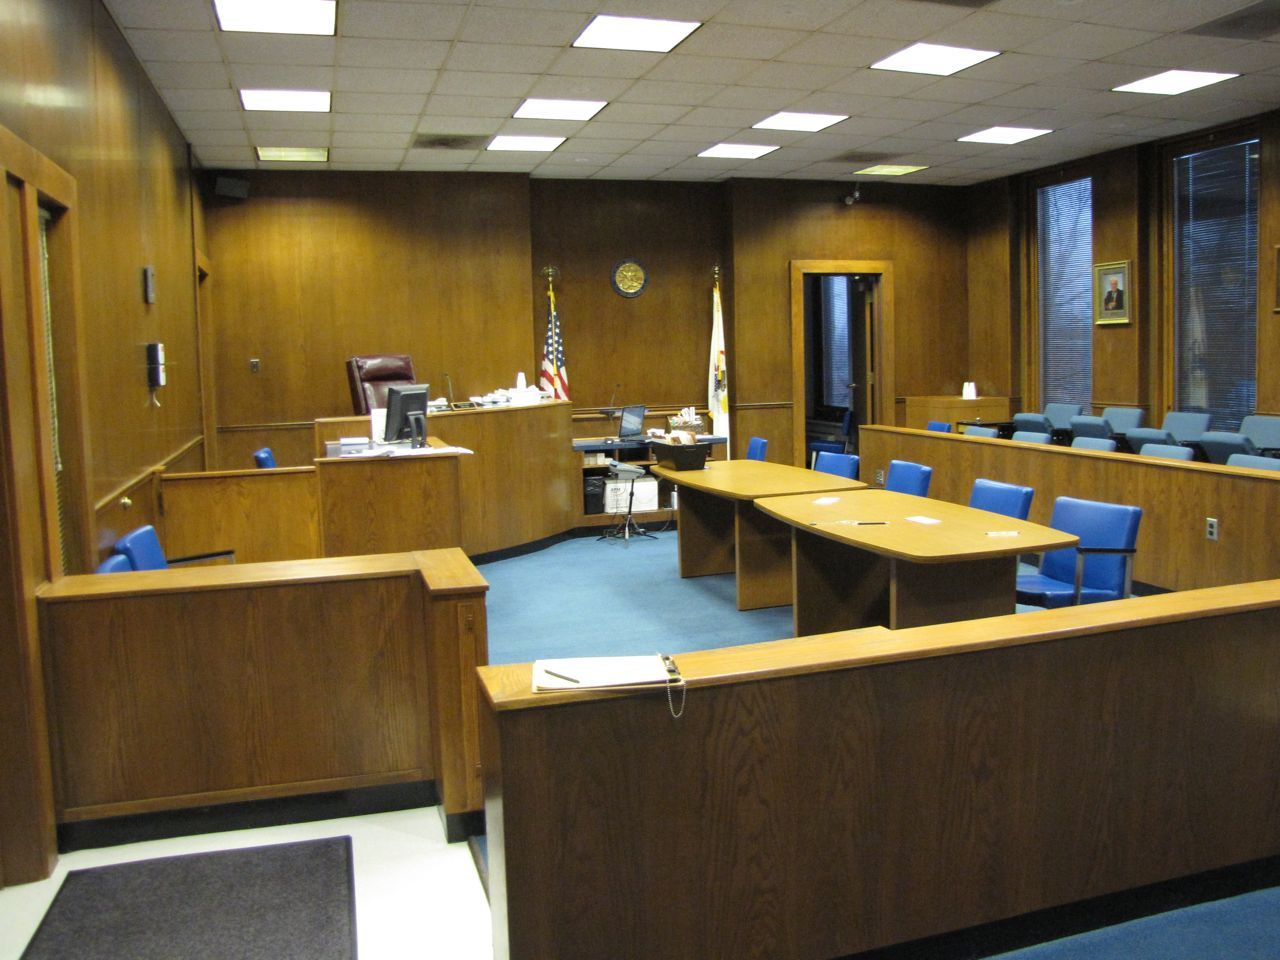 Courtroom A on the third floor